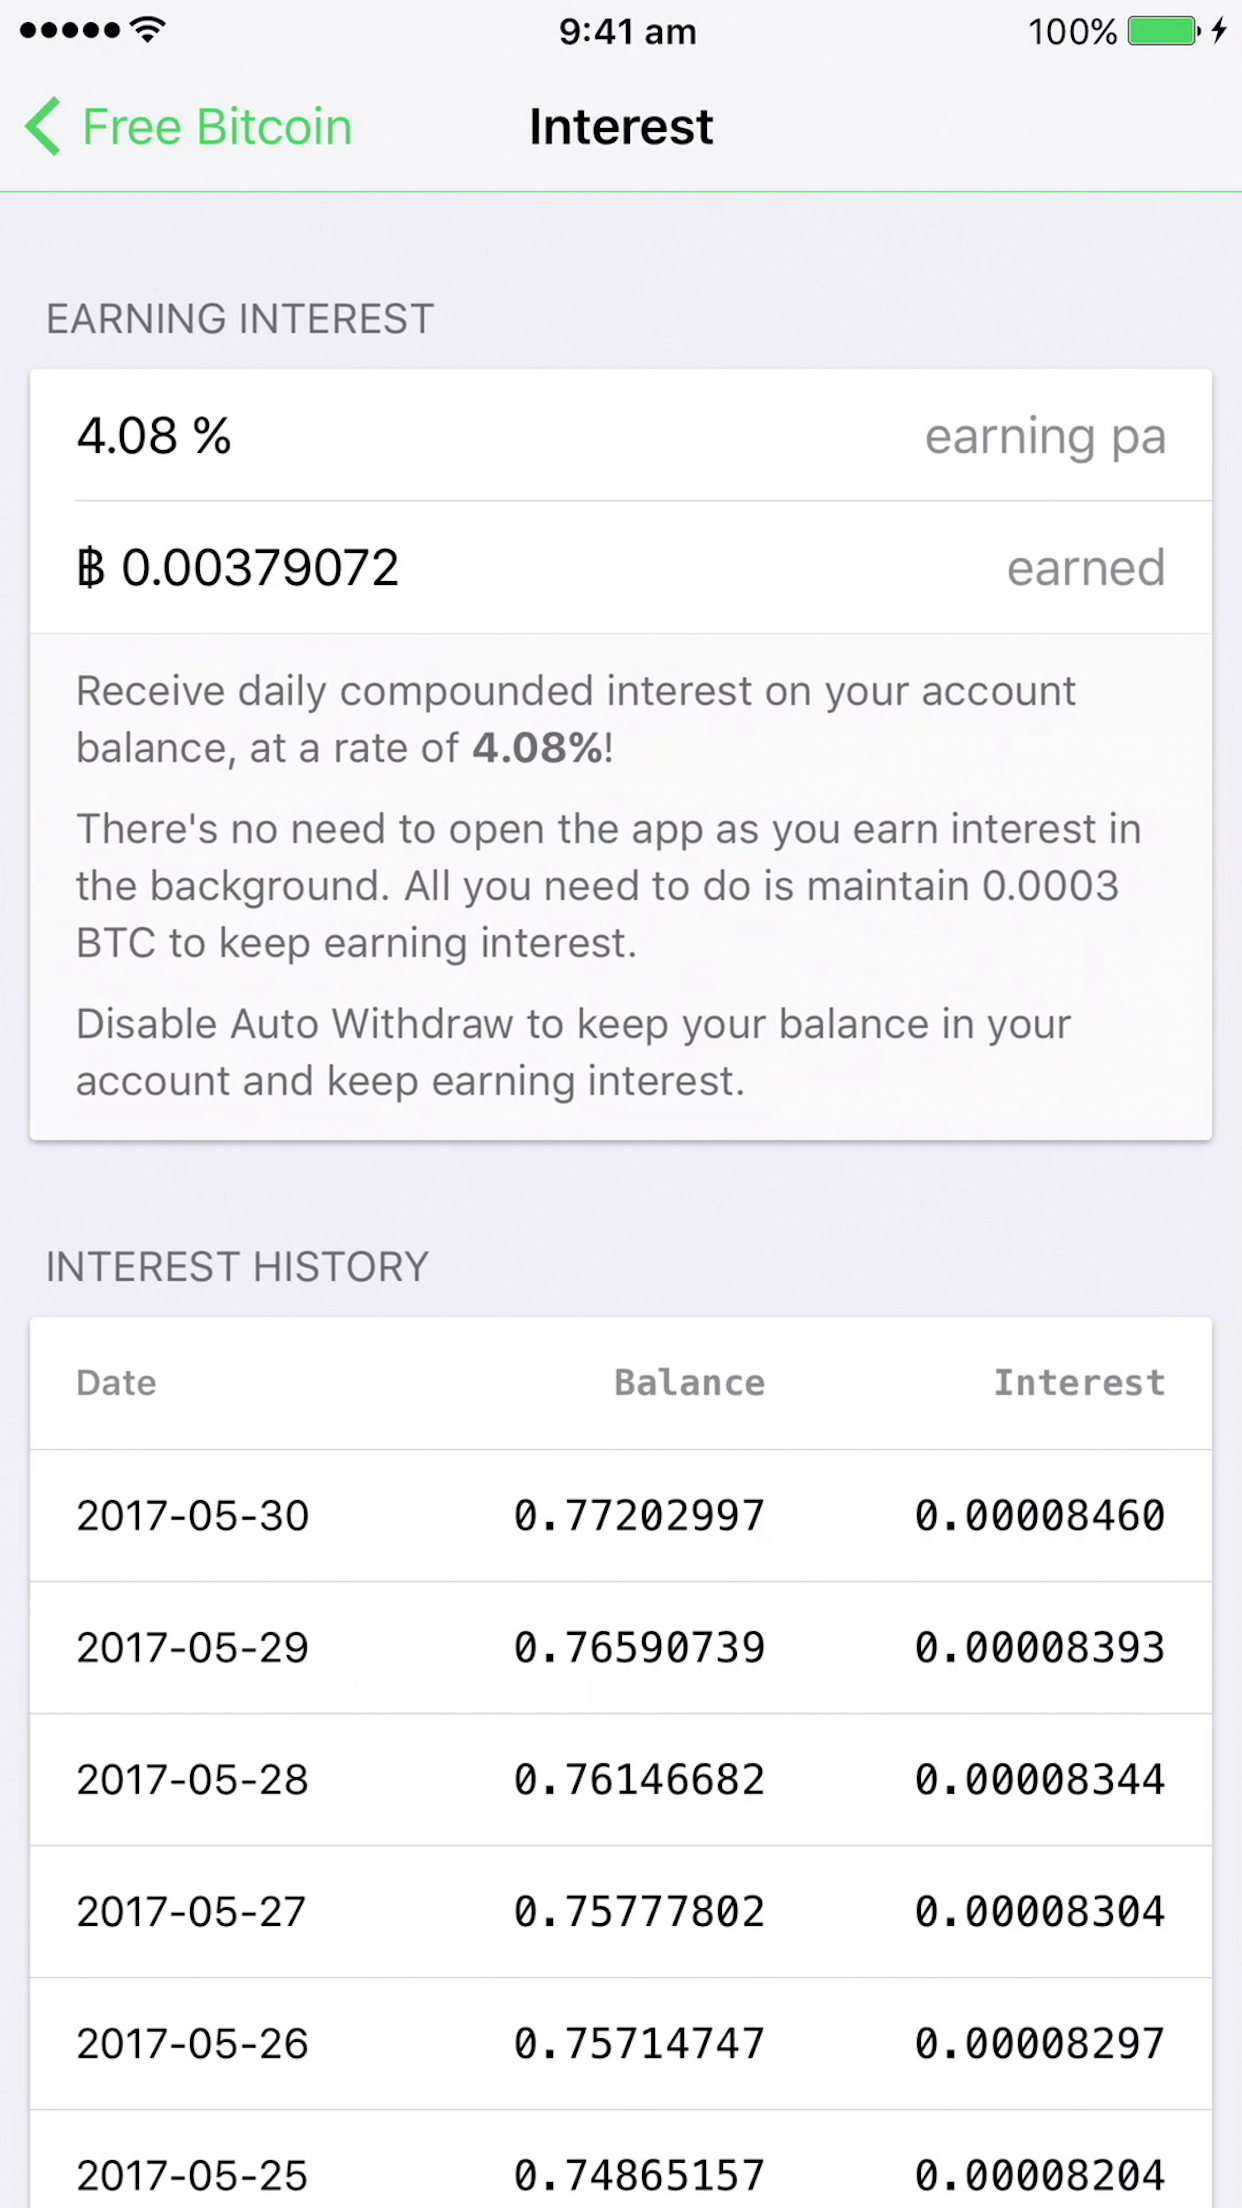 Earn interest on your Bitcoin stored in the app, at 4.08%!